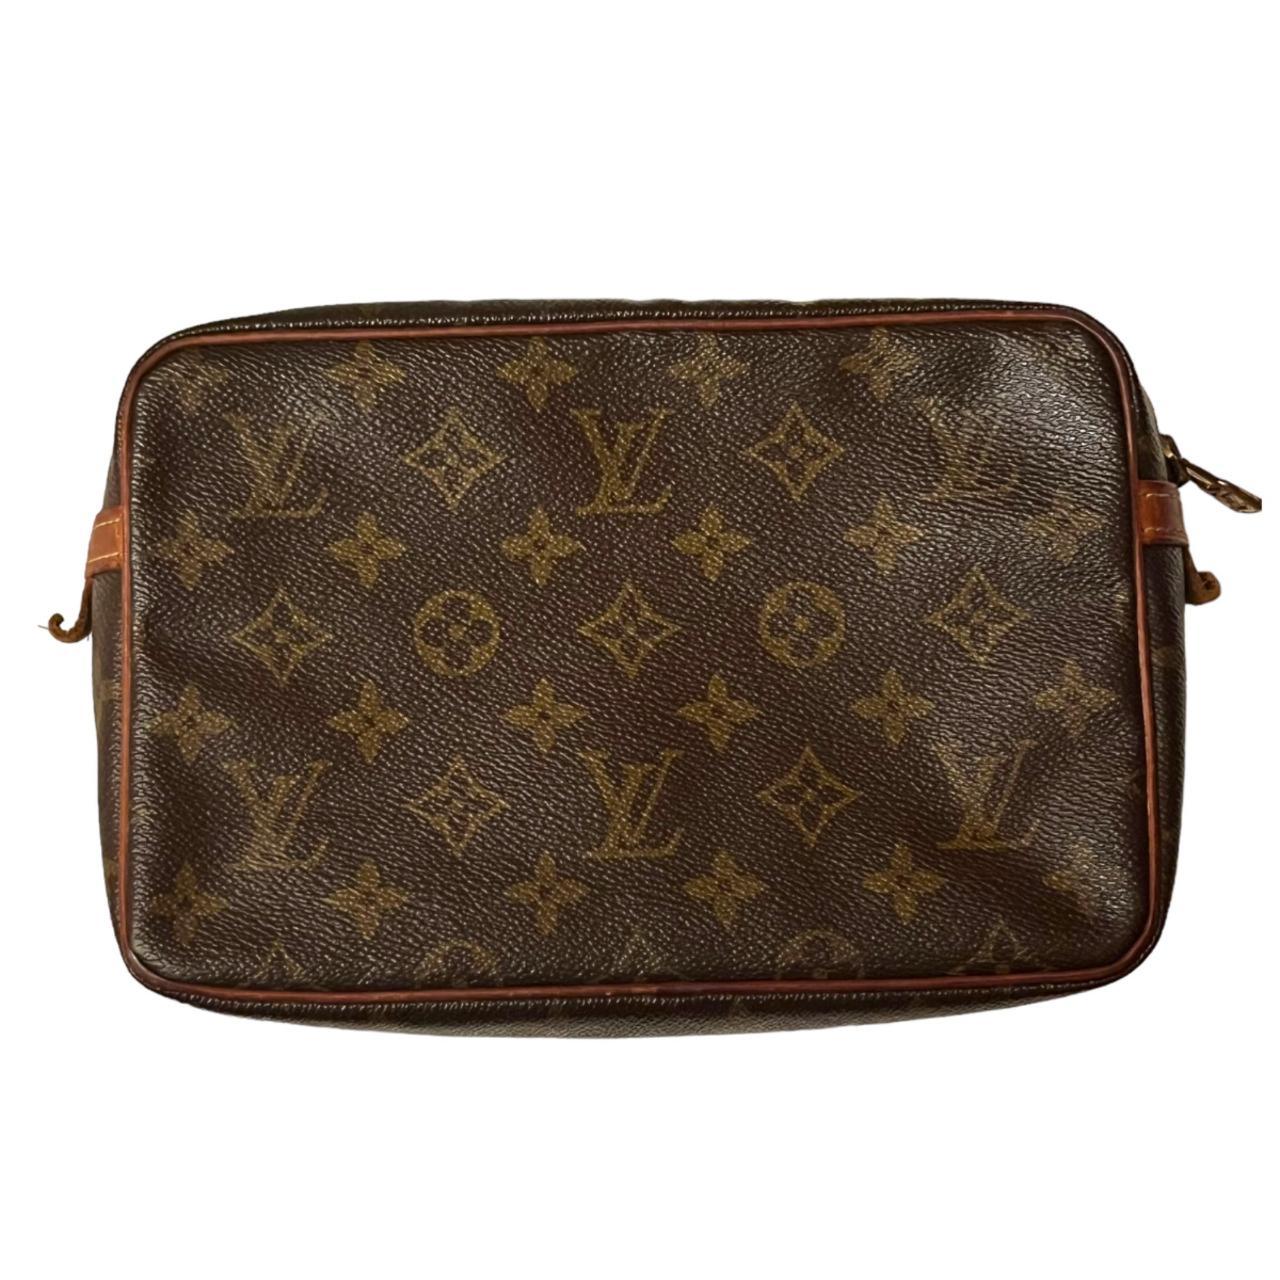 New in box guaranteed authentic LOUIS VUITTON - Depop